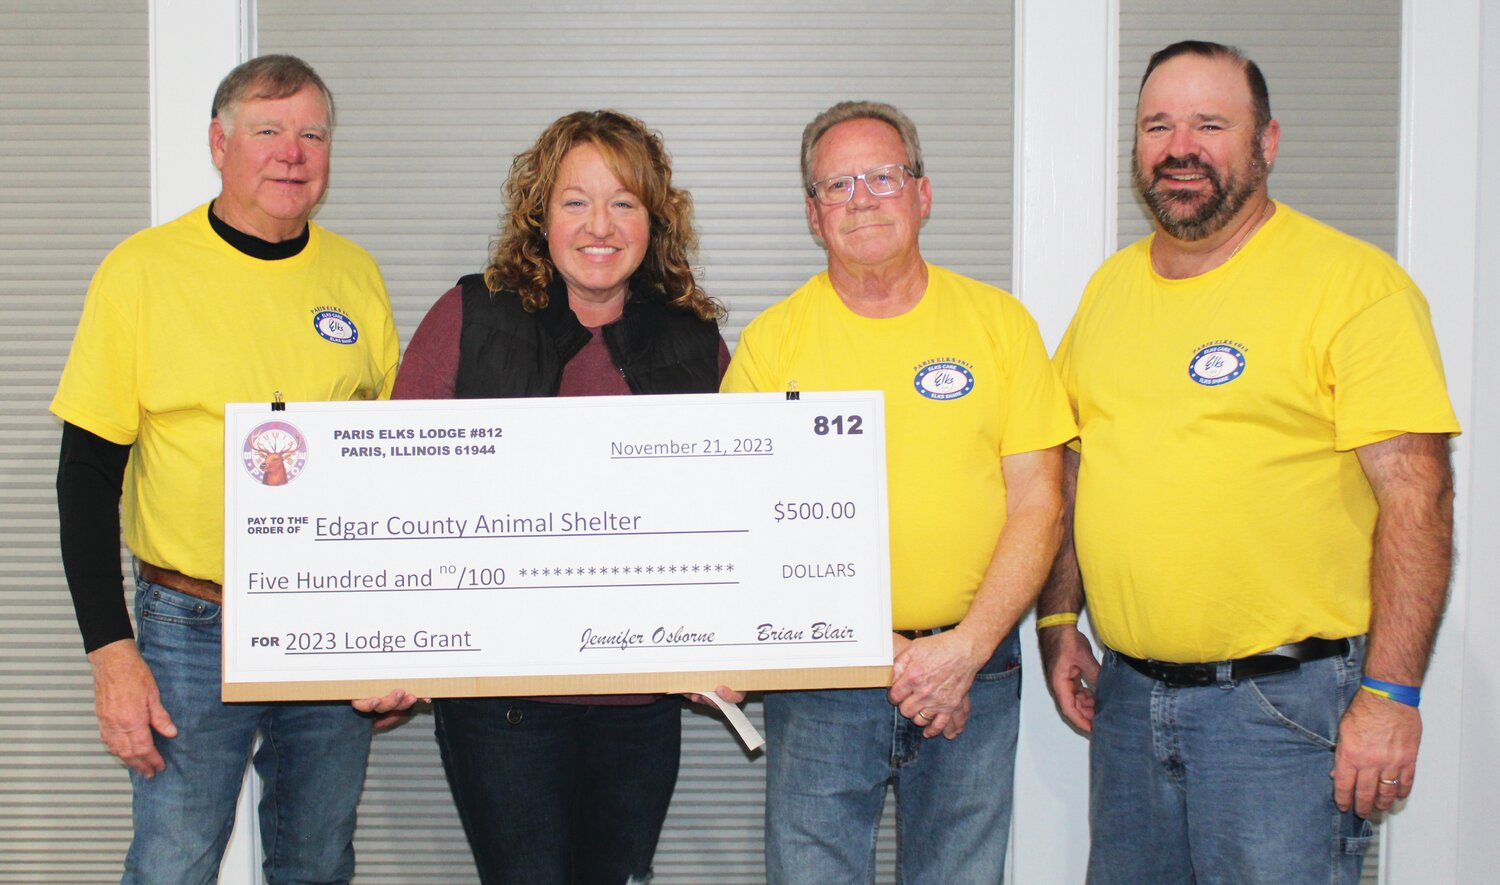 Andrea Bouslog accepted a $500 donation on behalf of the Edgar County Animal Shelter from Paris Elks Lodge #812. Left to right are Jim Cooper, Bouslog, Ray Korte and Chad Stevens.